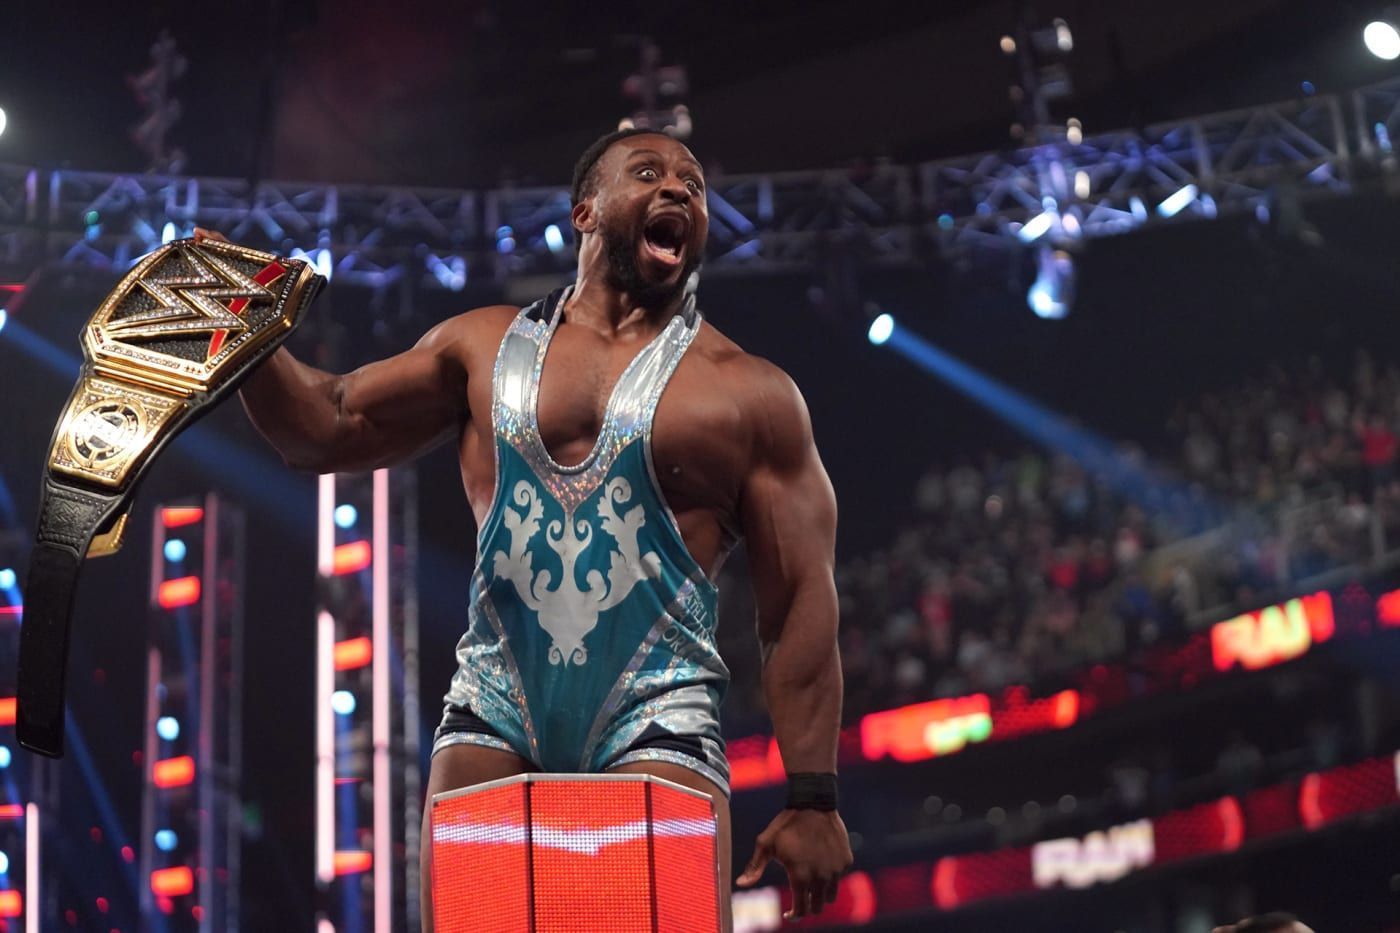 Big E, after winning his first WWE Championship